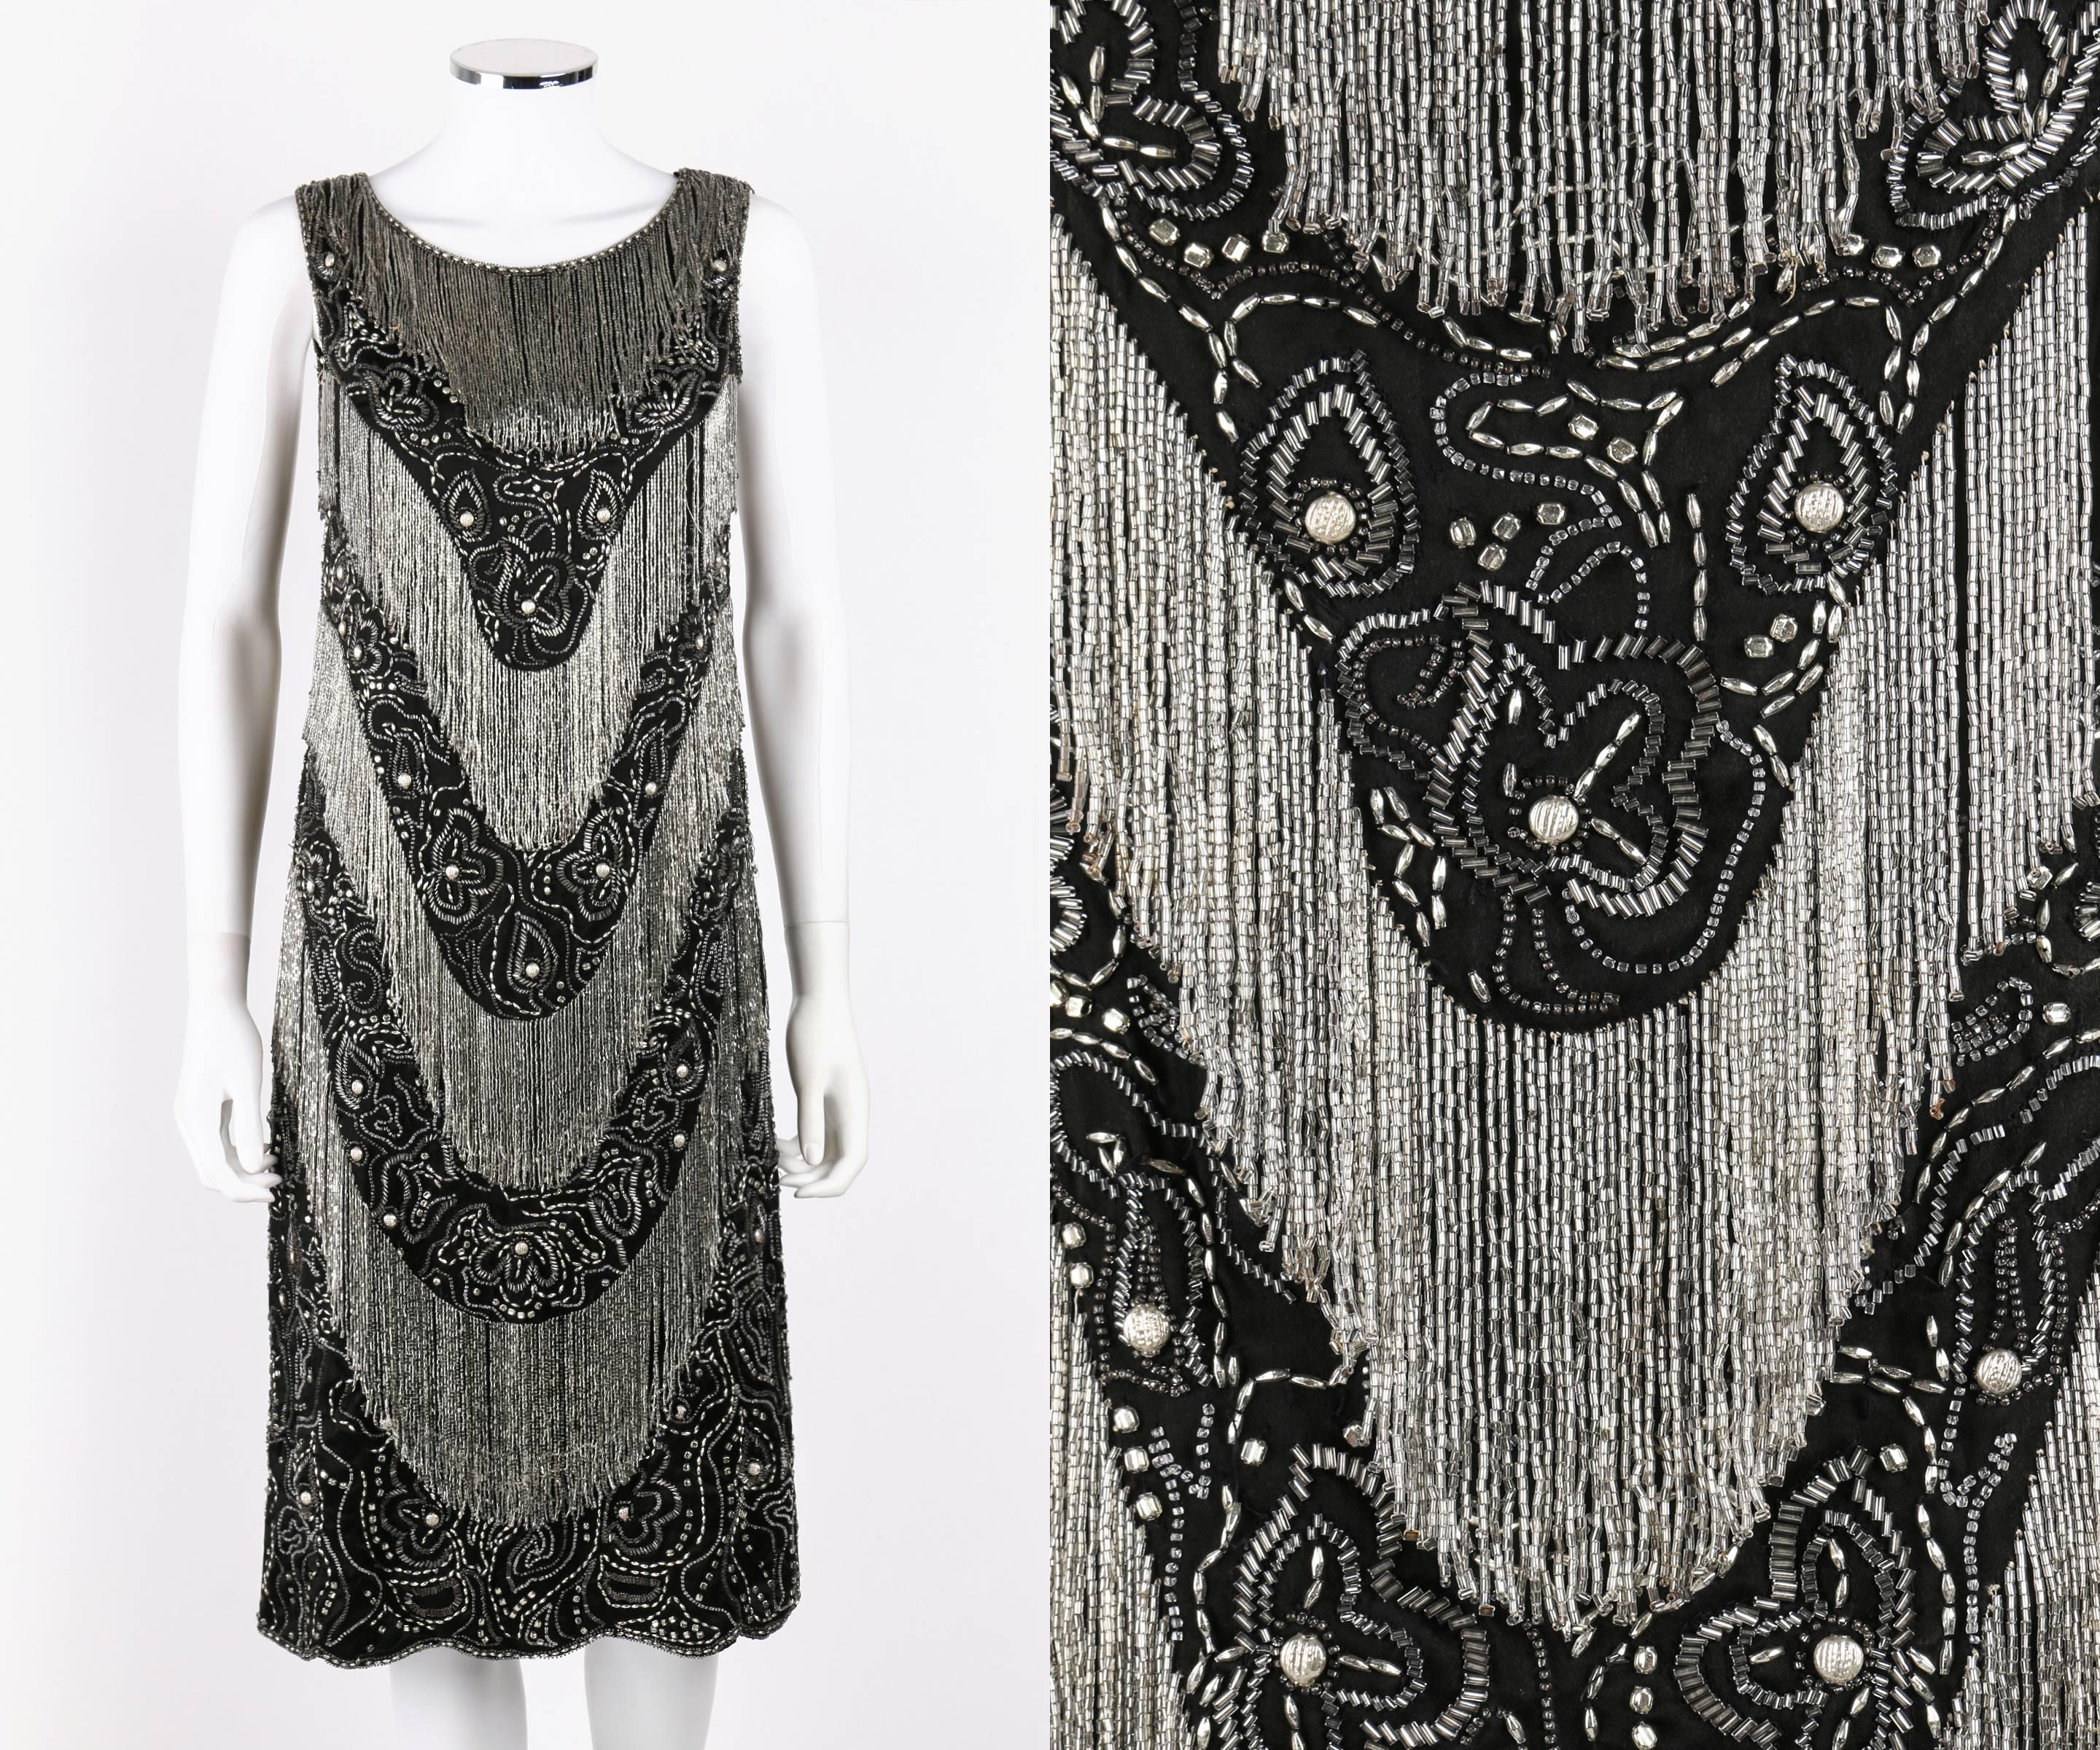 Couture c.1920's vintage black silk heavily beaded flapper evening dress. Tiered scooped transparent glass bead fringe detail on front and back. Beaded floral embellishment between fringe layers. Sleeveless. Scoop neckline. Knee length scalloped